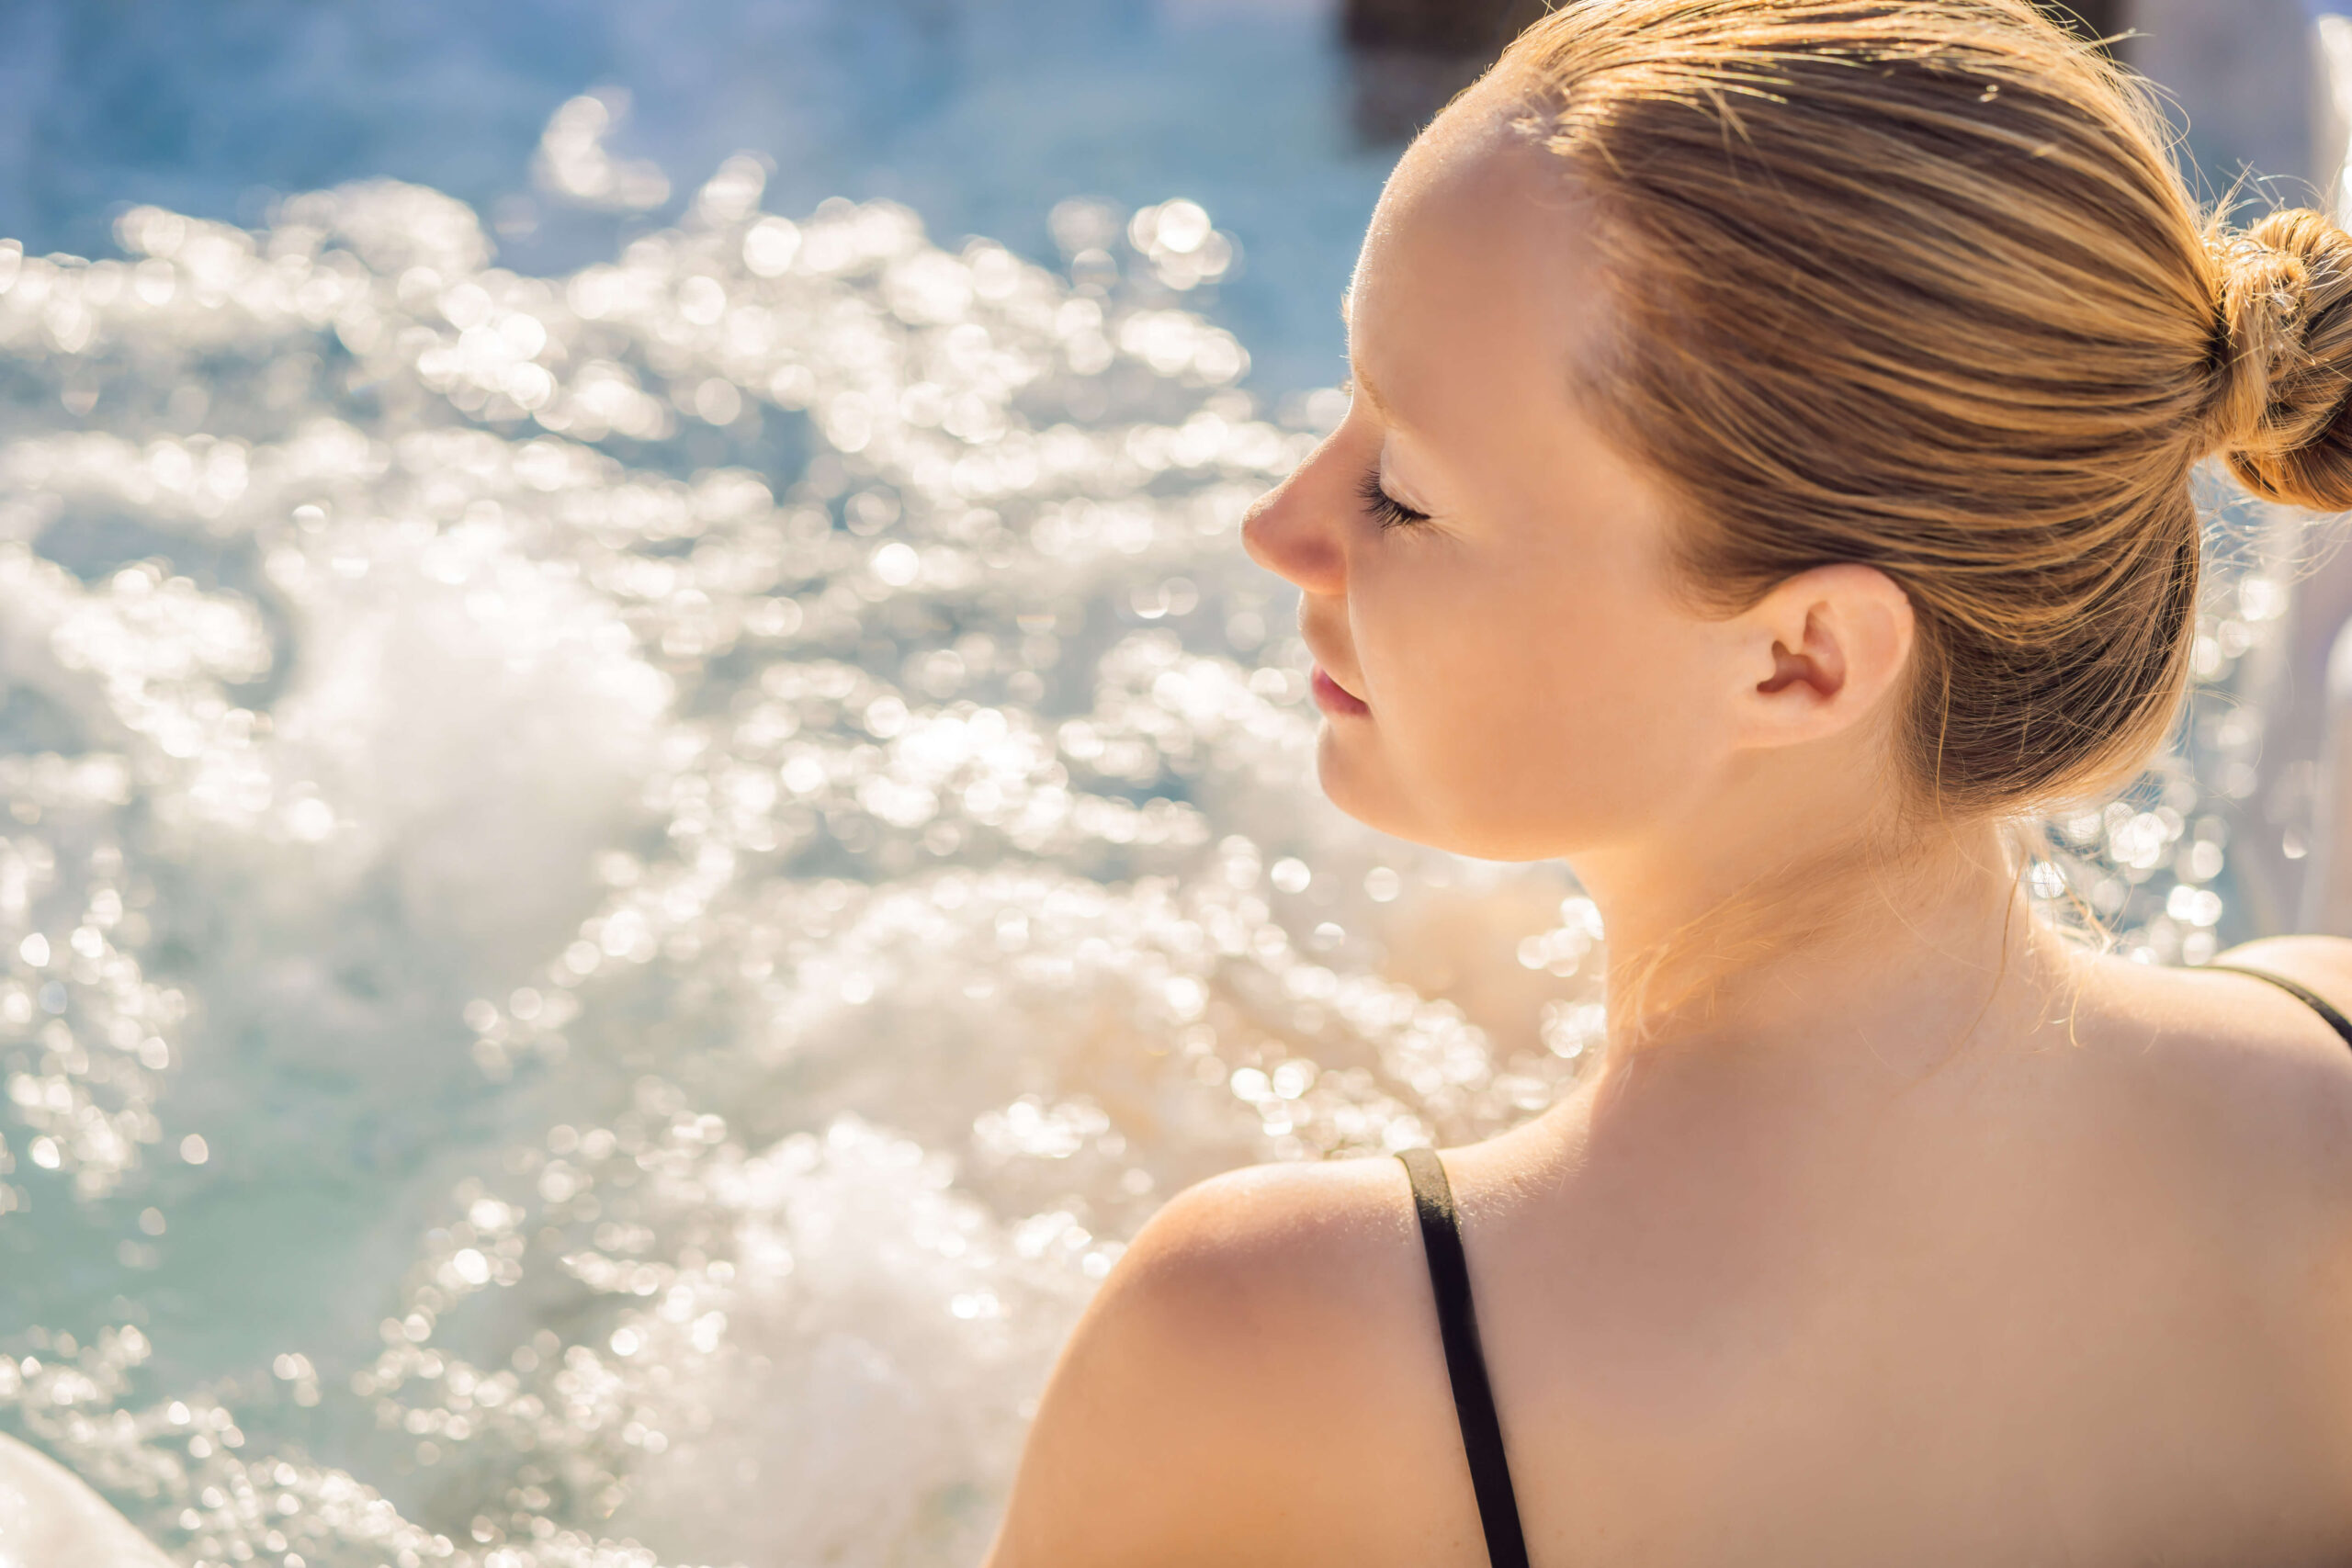 Dive Into January with the Top 5 Reasons to Buy a Hot Tub or Swim Spa